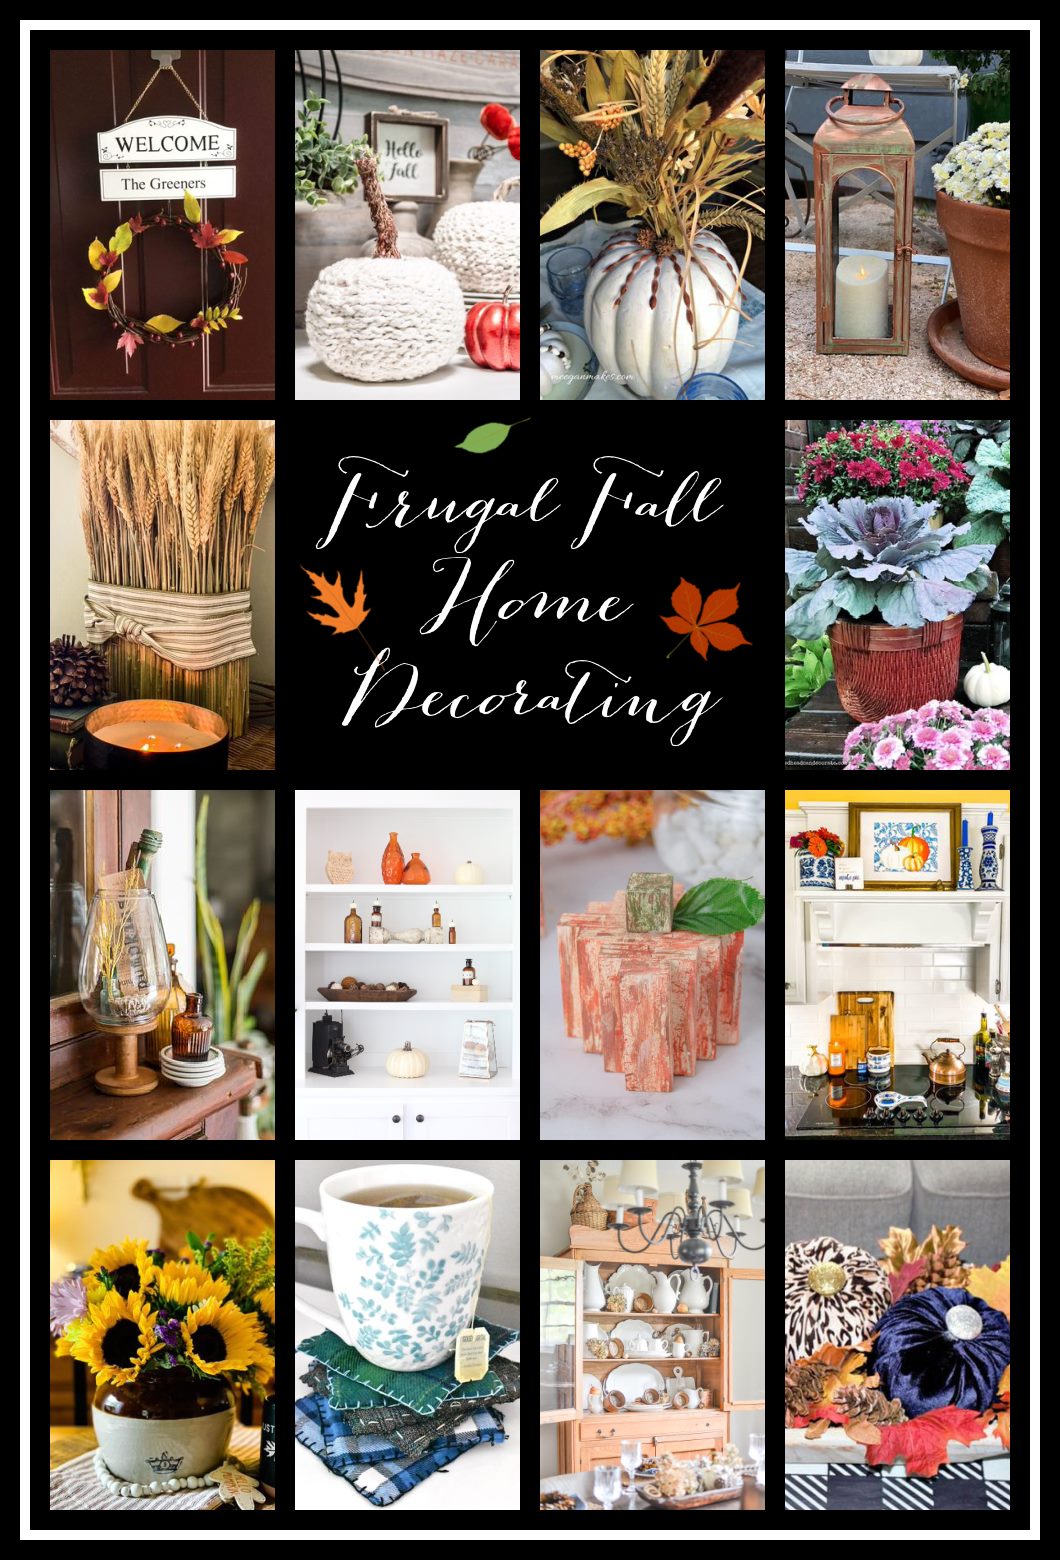 Frugal Fall Home Decorating ideas